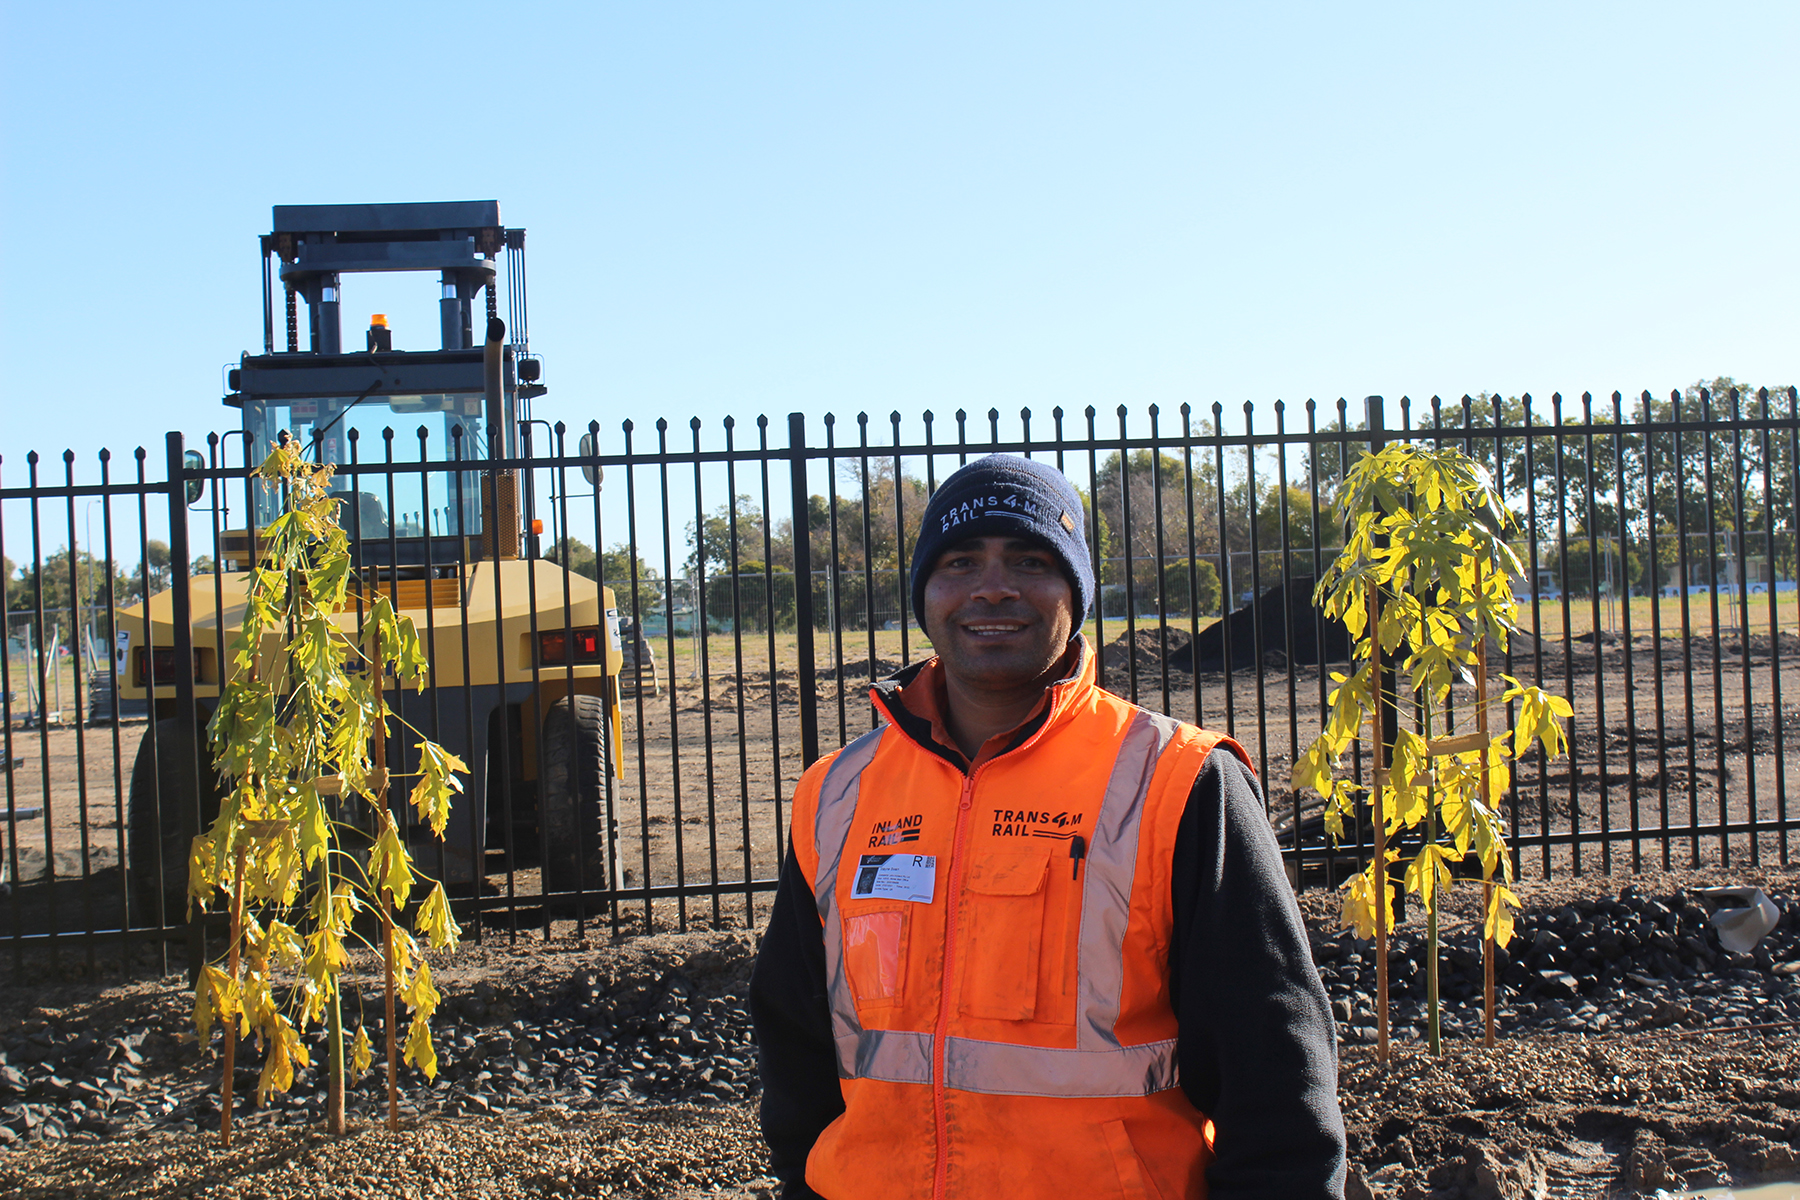 Wayne is a Civil Labourer and has been working on Narrabri to North Star Phase 1